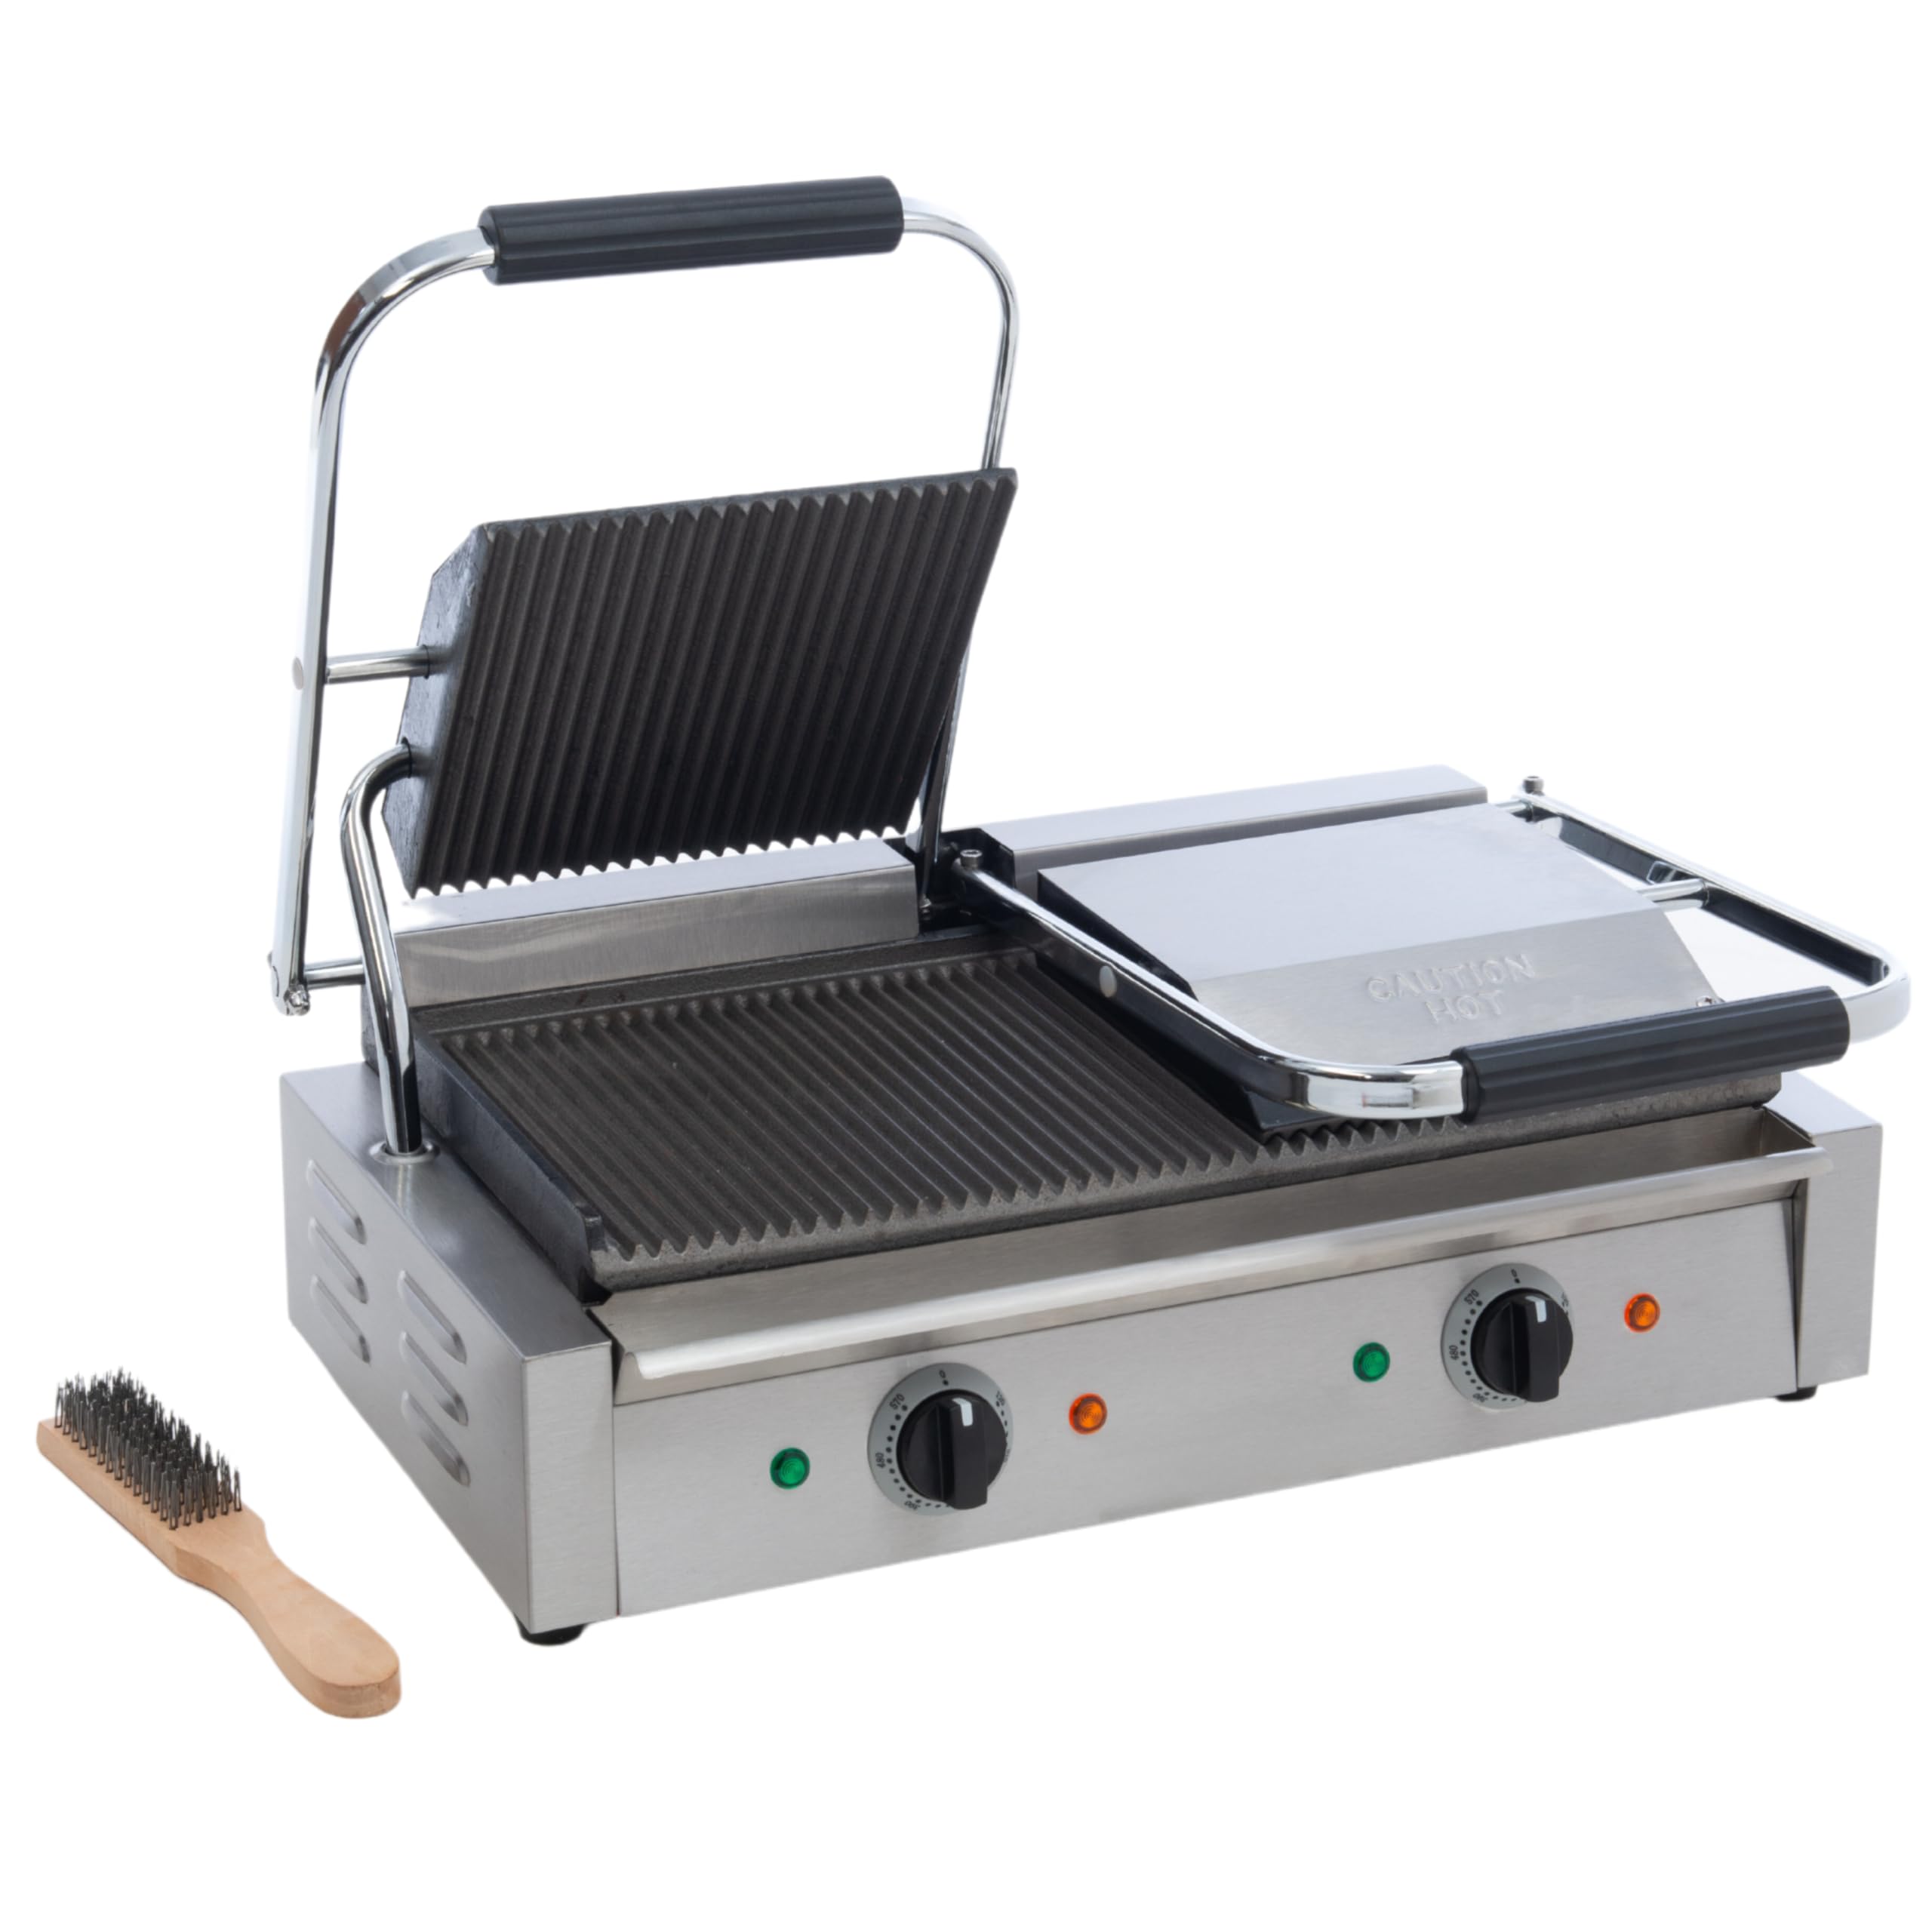 FSE SG-813 Double Electric Sandwich Panini Grill with Cast Iron Grooved Plates, Stainless Steel, Oil Tray, 120v